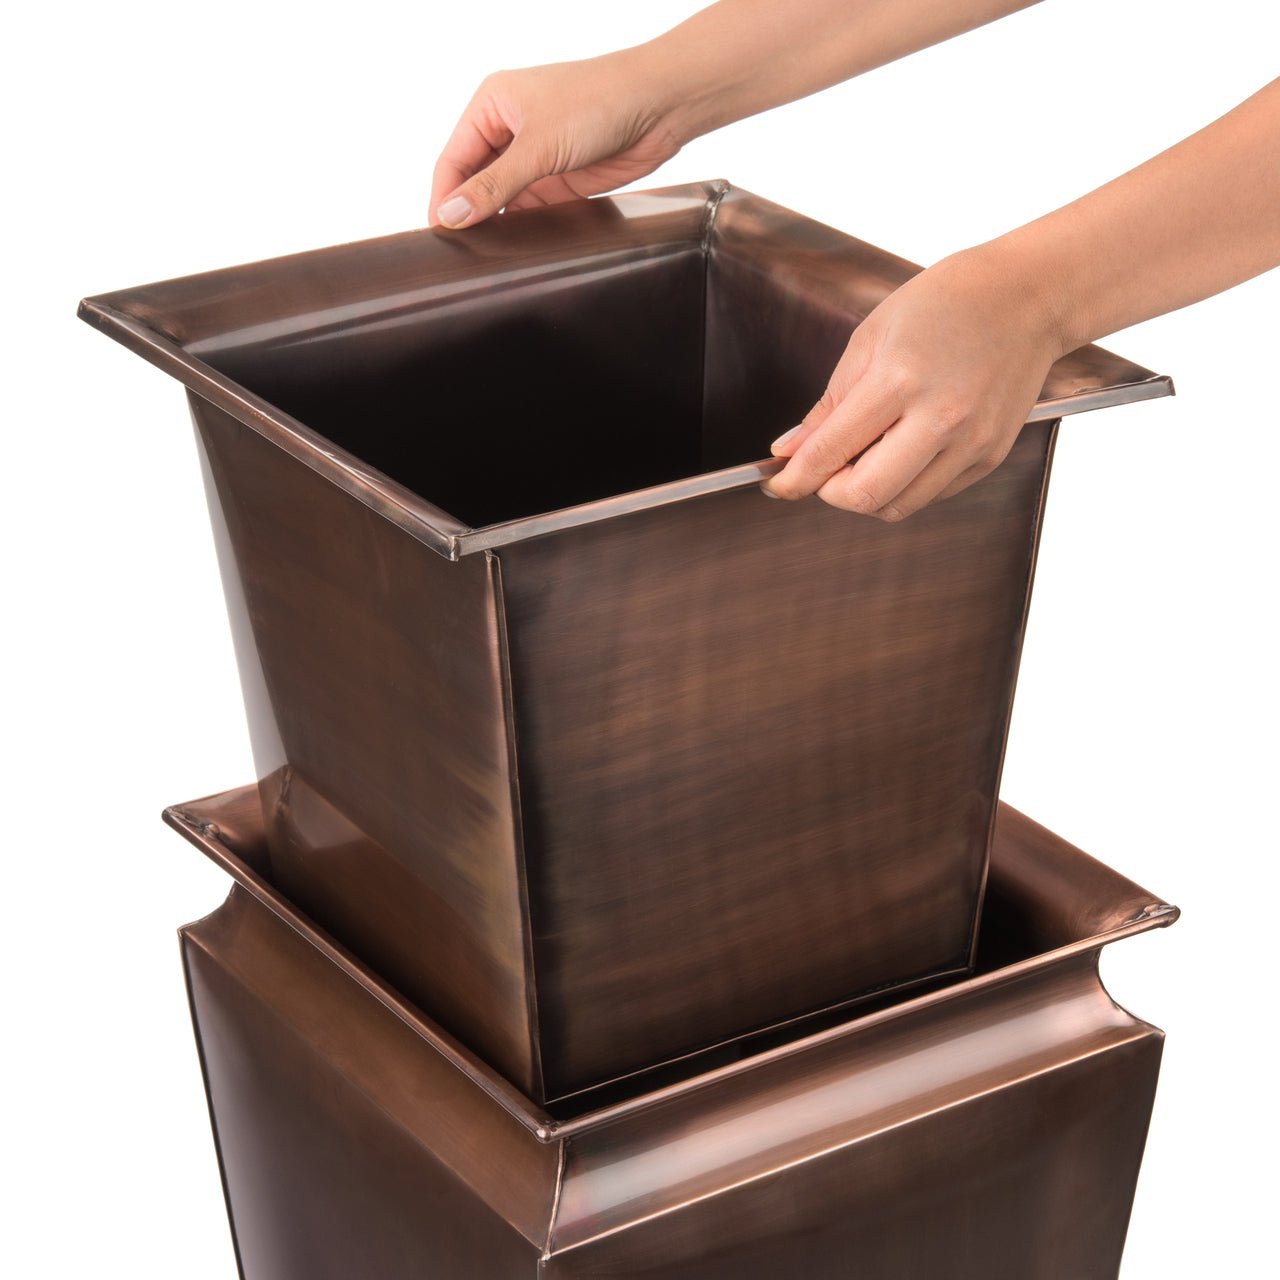 H Potter tall planter with insert for planting